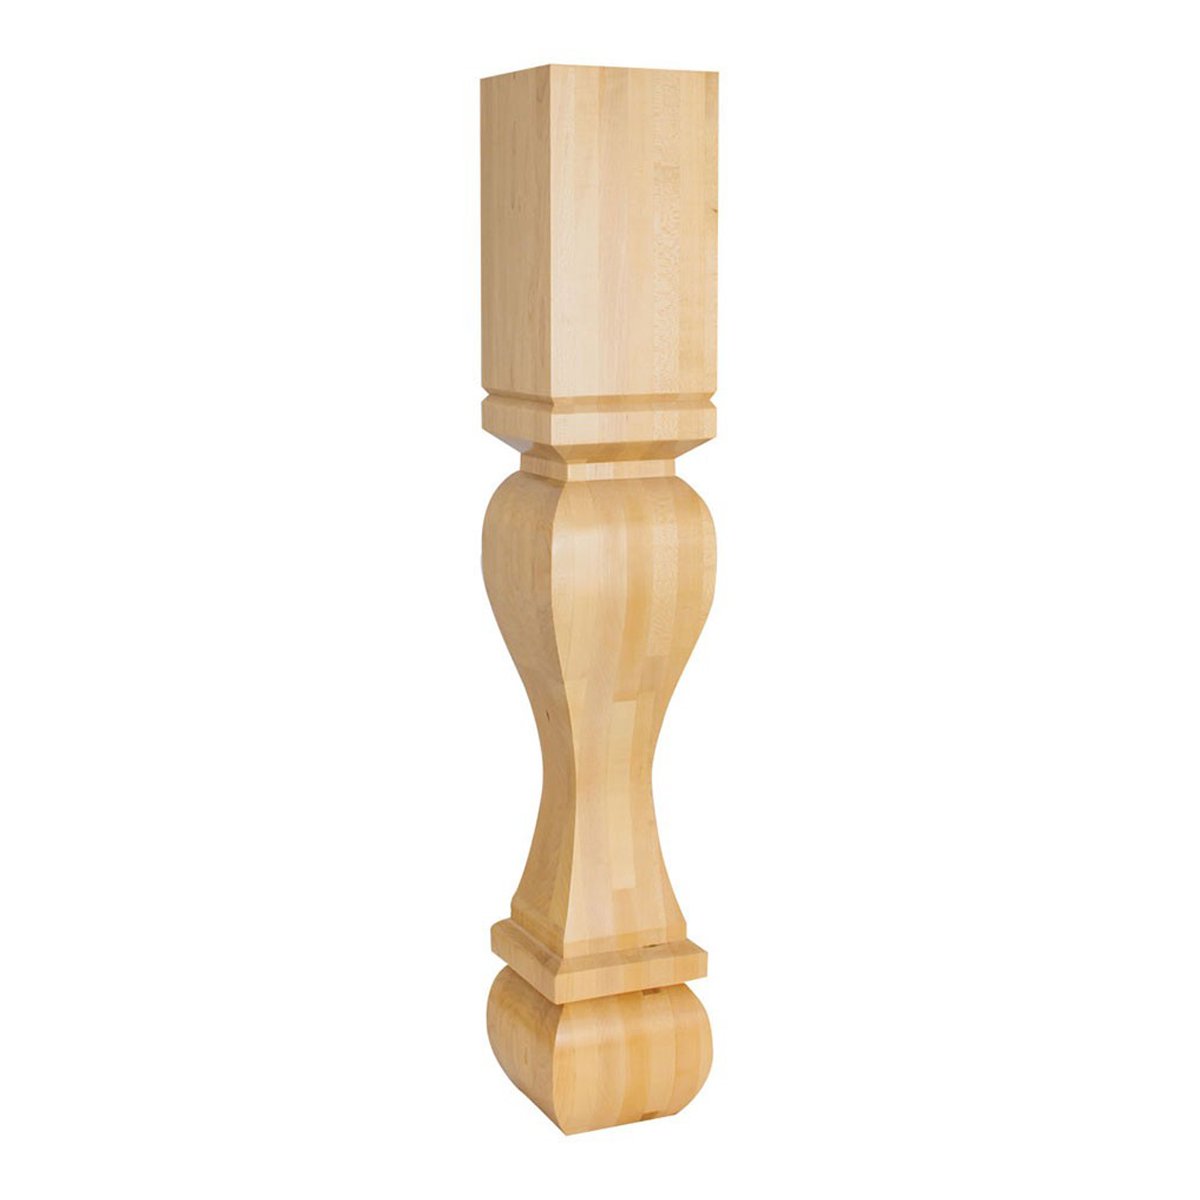 Hardware Resources 6" x 6" x 35-1/2" Square Cherry Post / Table Leg with Foot-DirectSinks